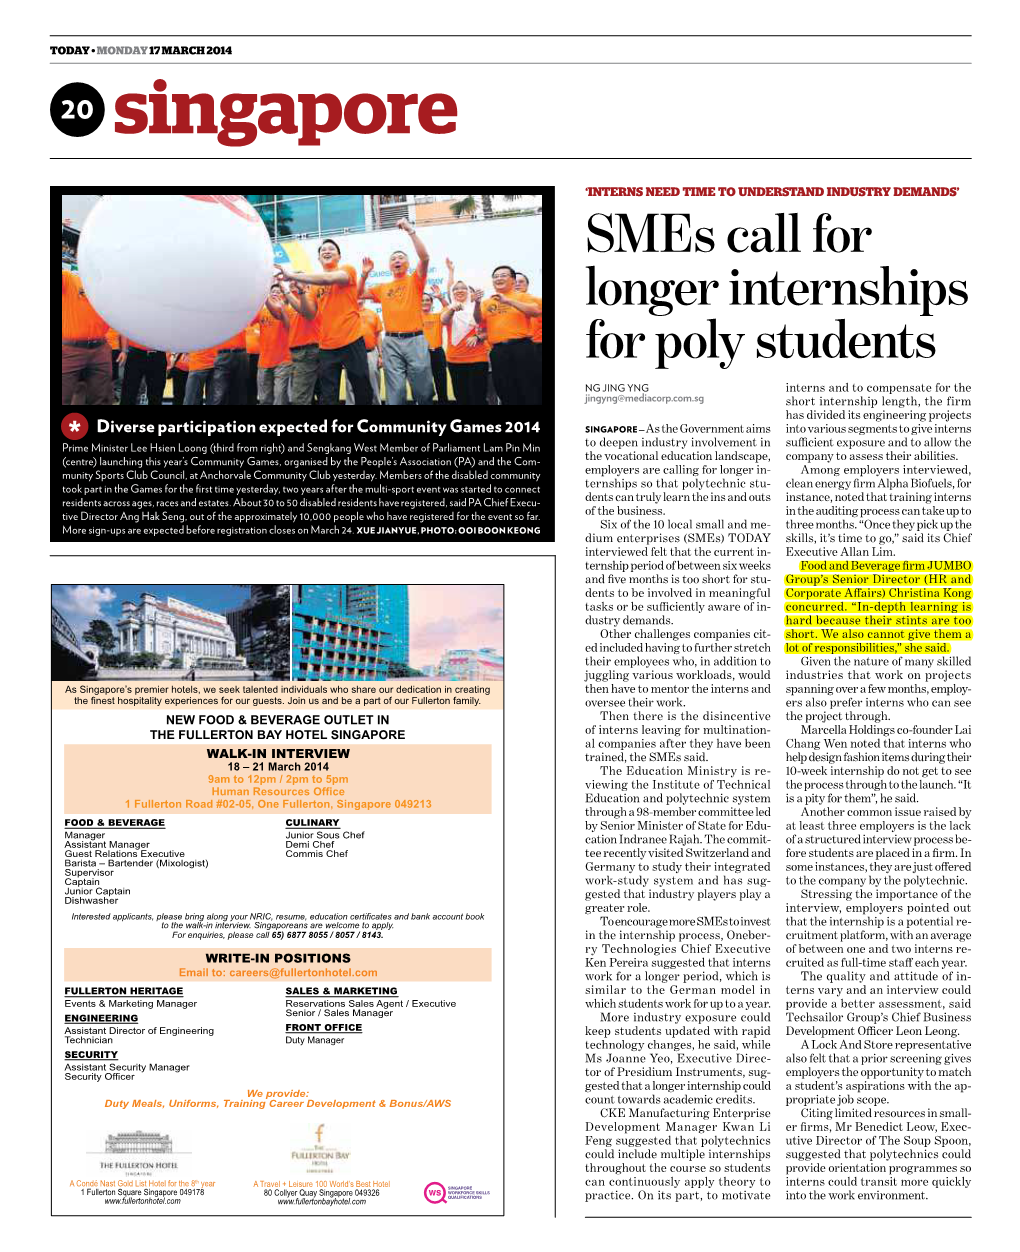 Smes Call for Longer Internships for Poly Students